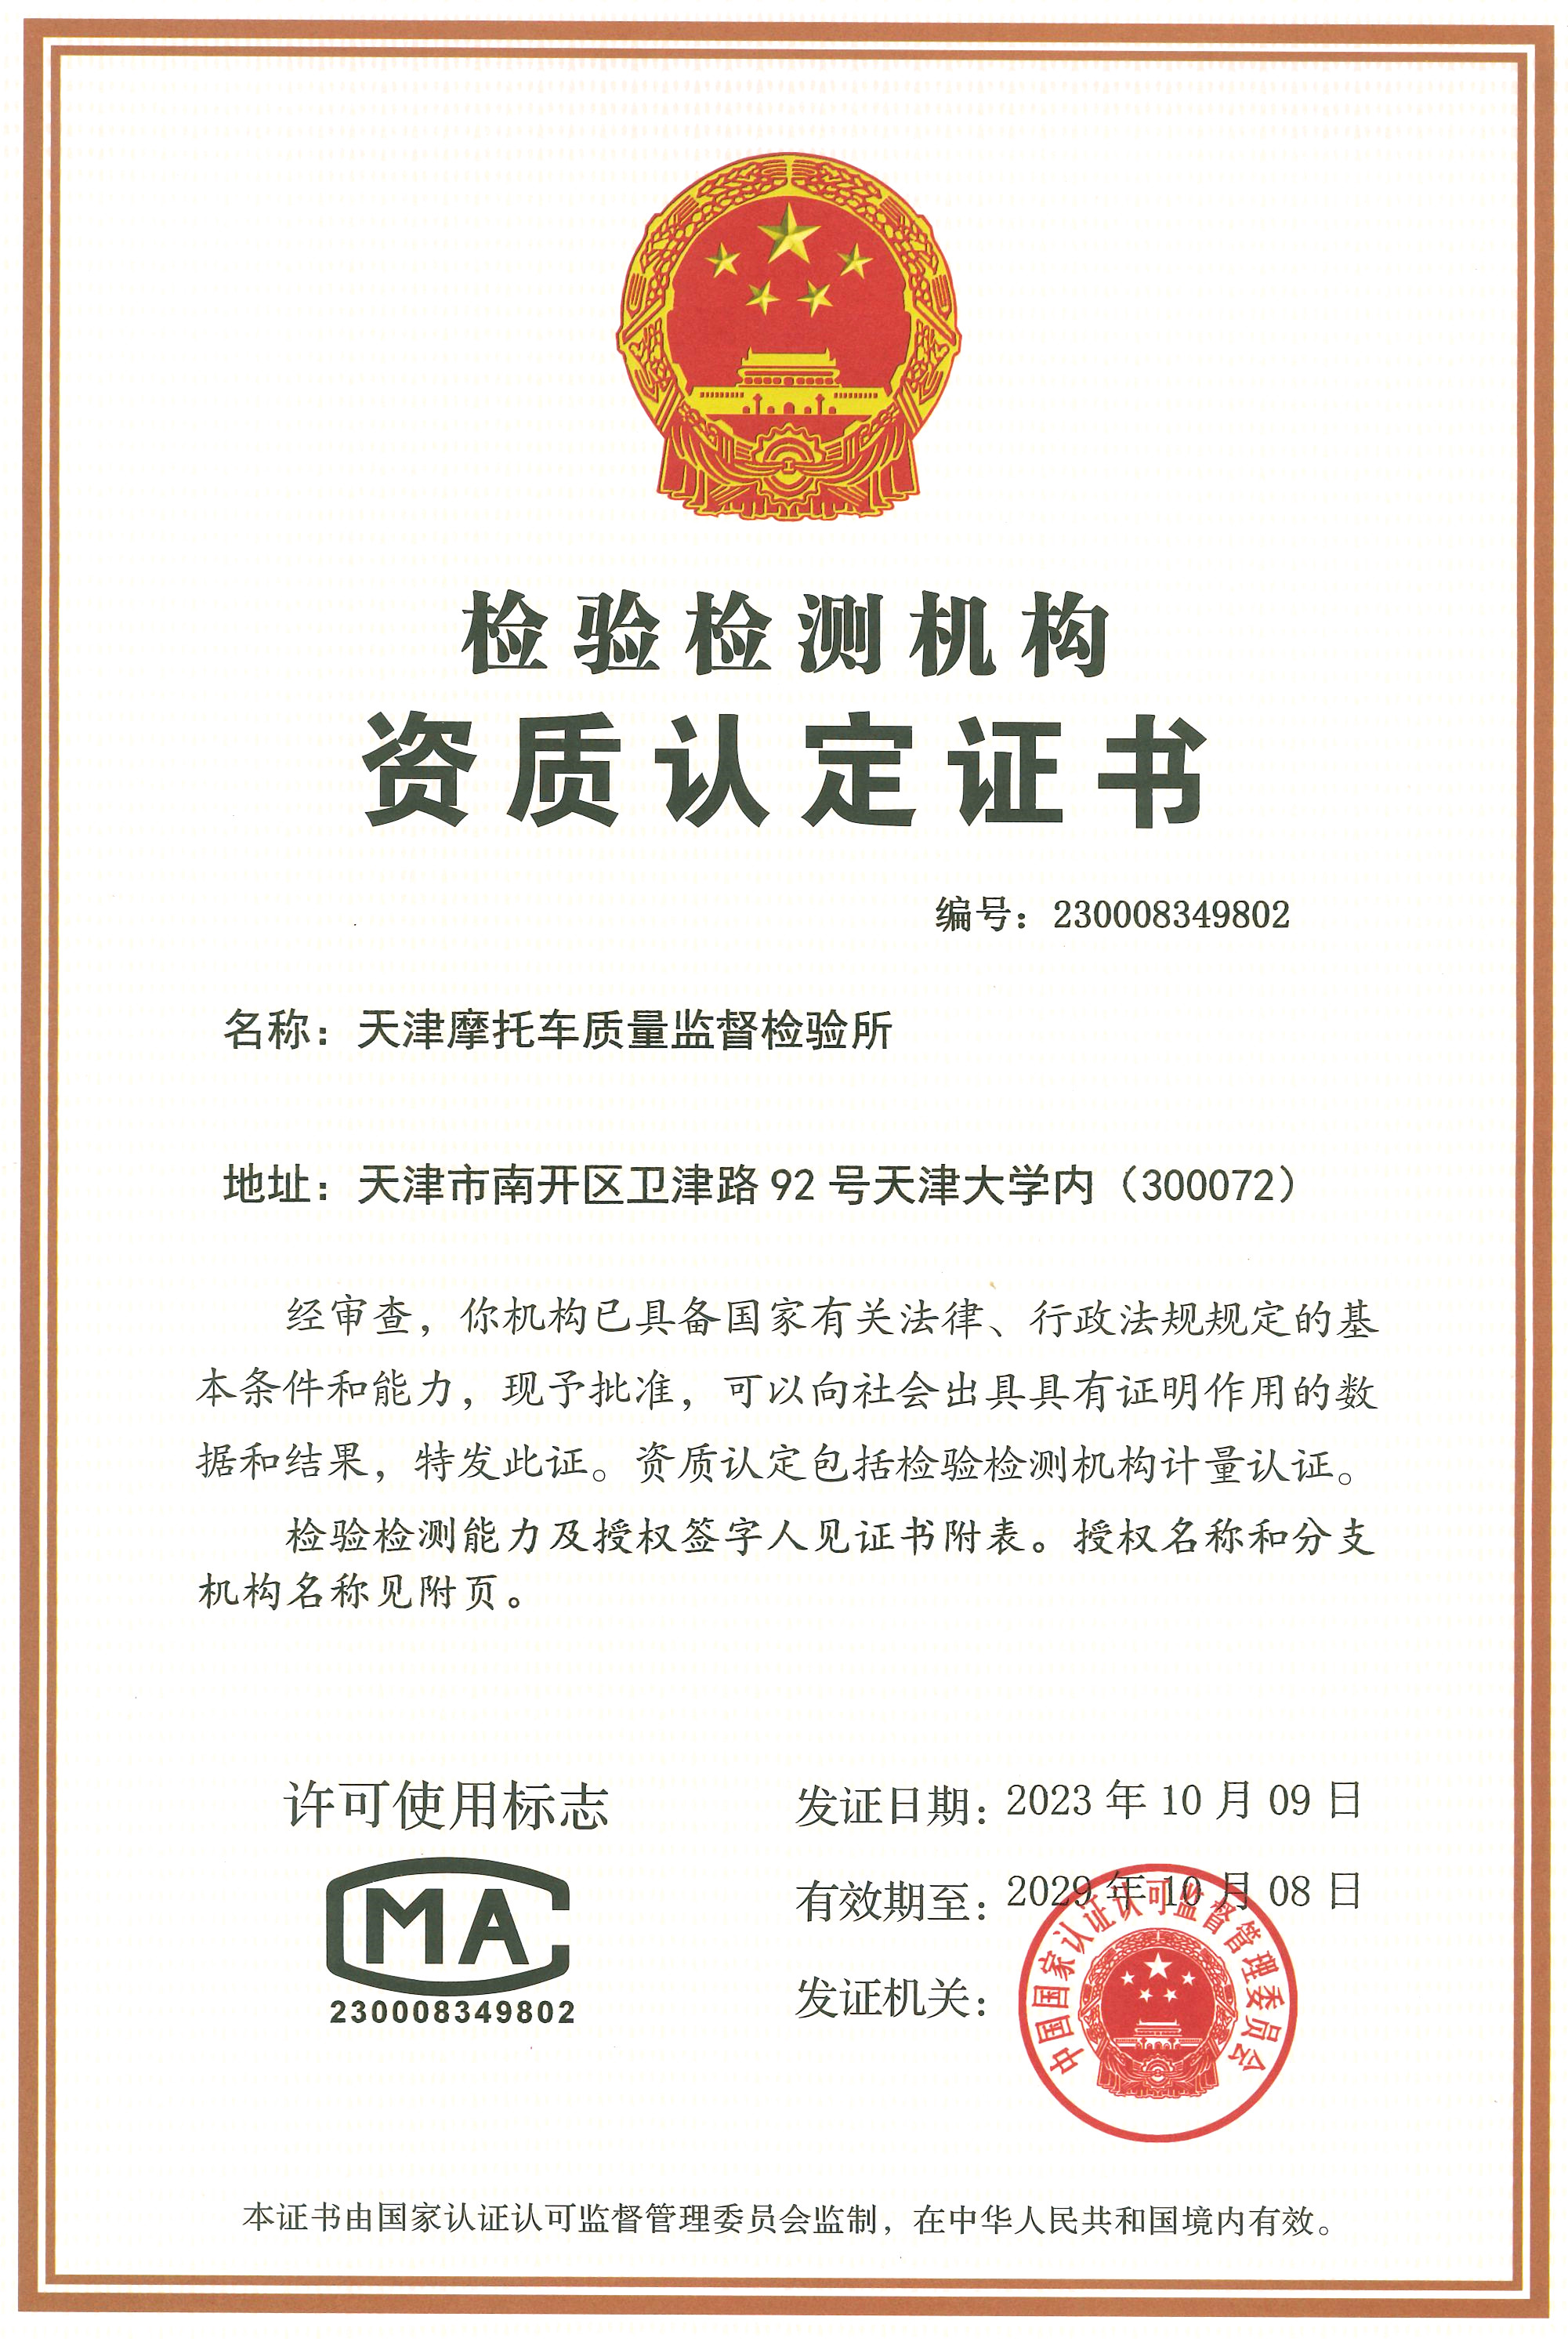 Certificate for qualification accreditation of Tianjin Motorcycle Quality Supervision & Testing Institute